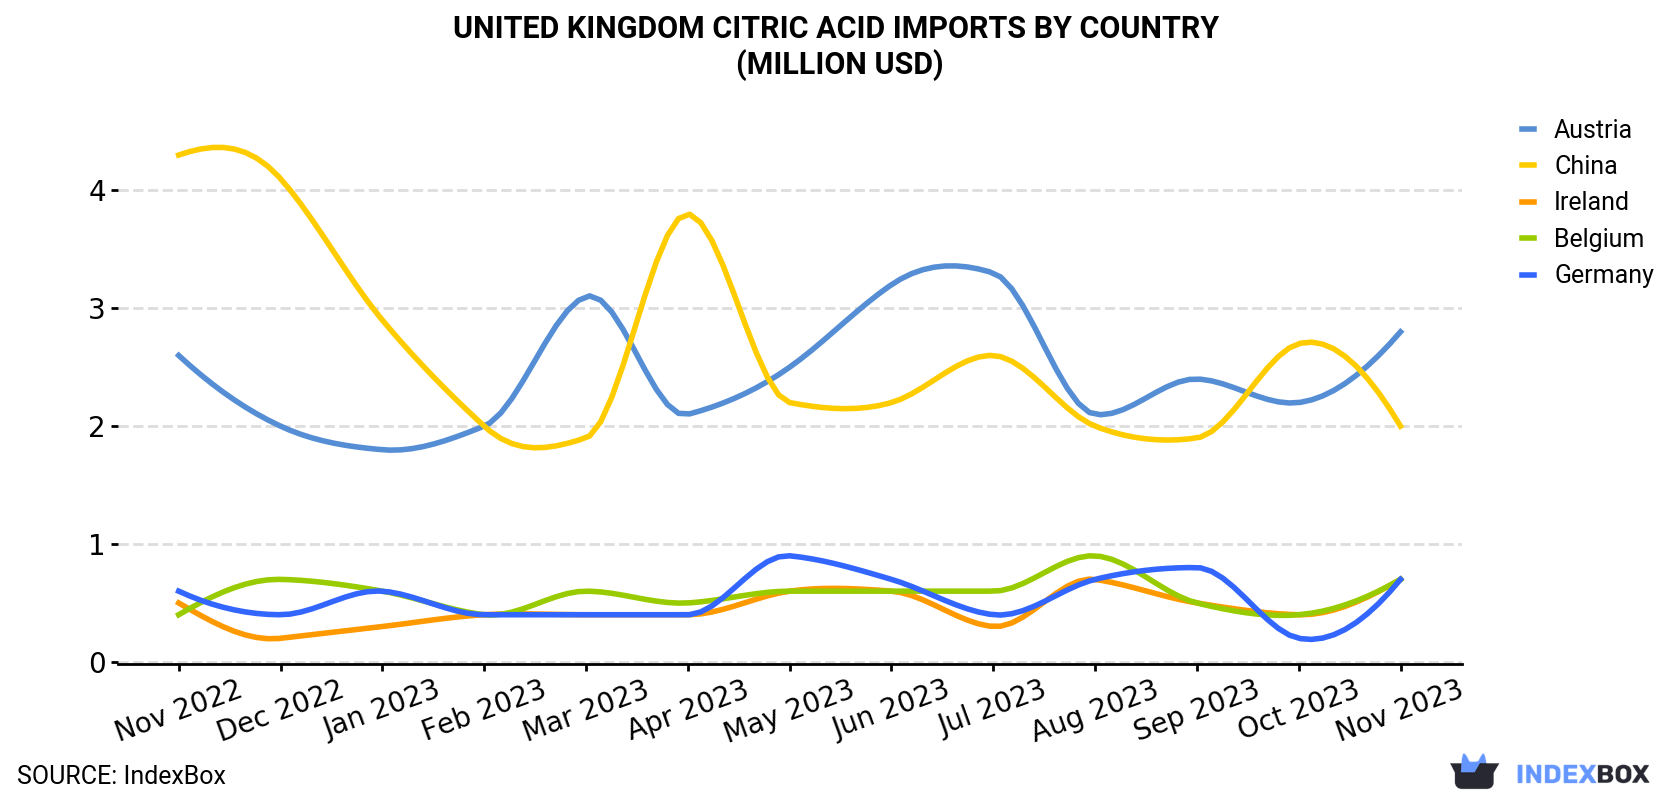 United Kingdom Citric Acid Imports By Country (Million USD)